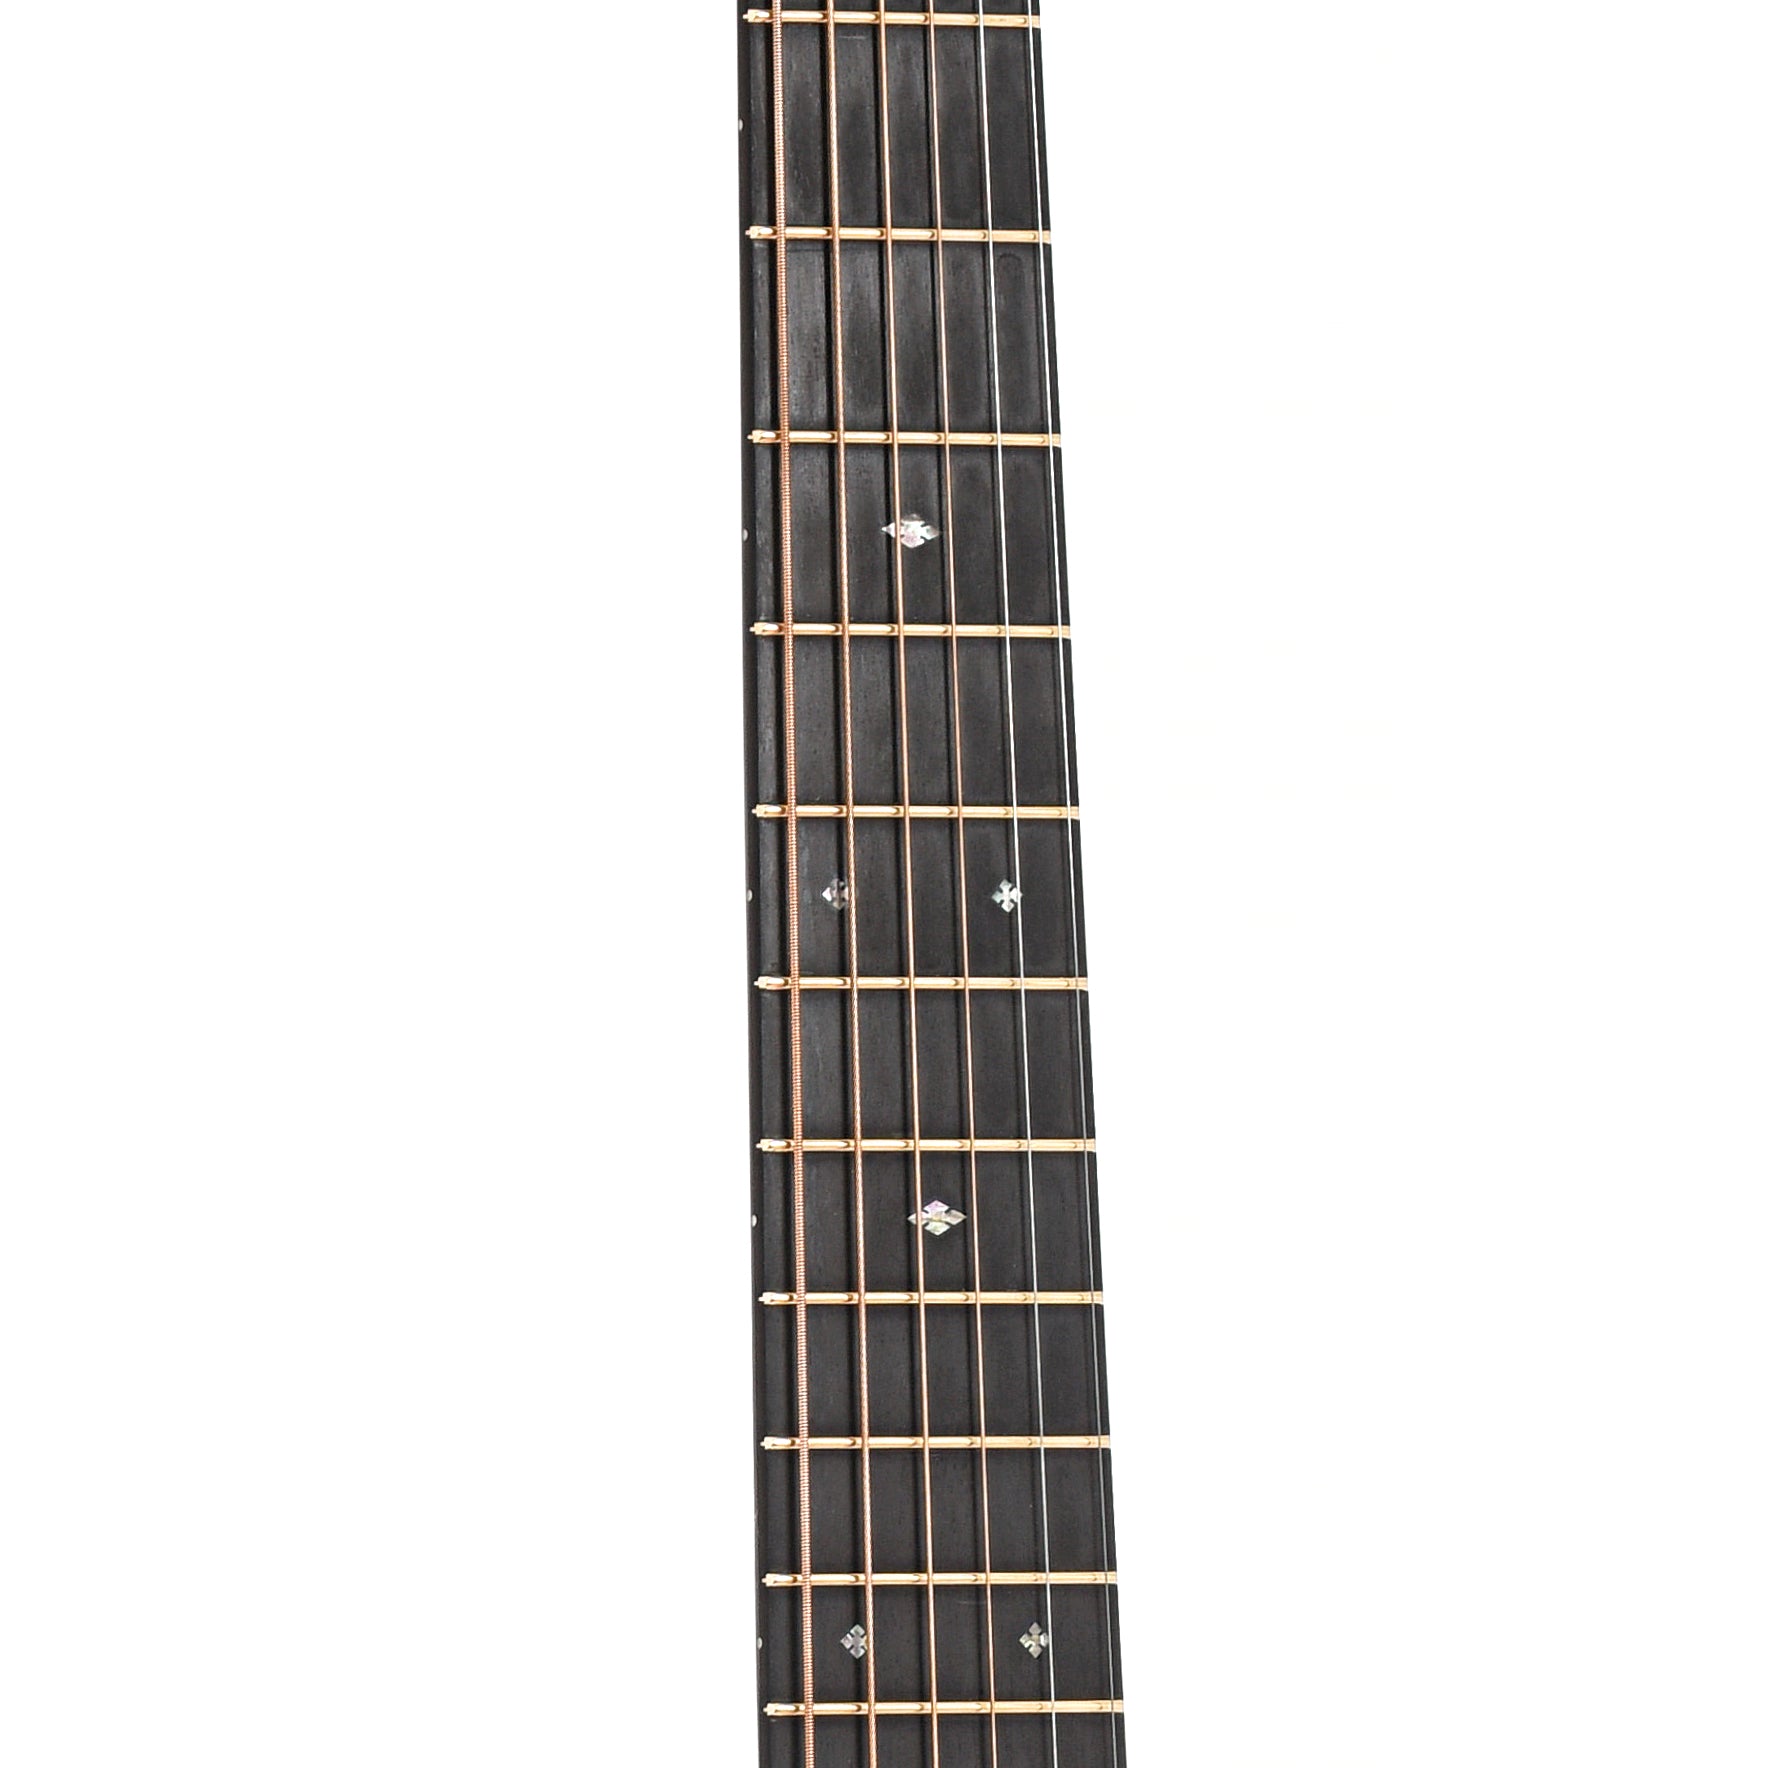 Fretboard of Pre-War Guitar Co. Double Aught (00) Old-Growth Indian Rosewood, Iced-Tea Burst, Level 2 Aging Acoustic